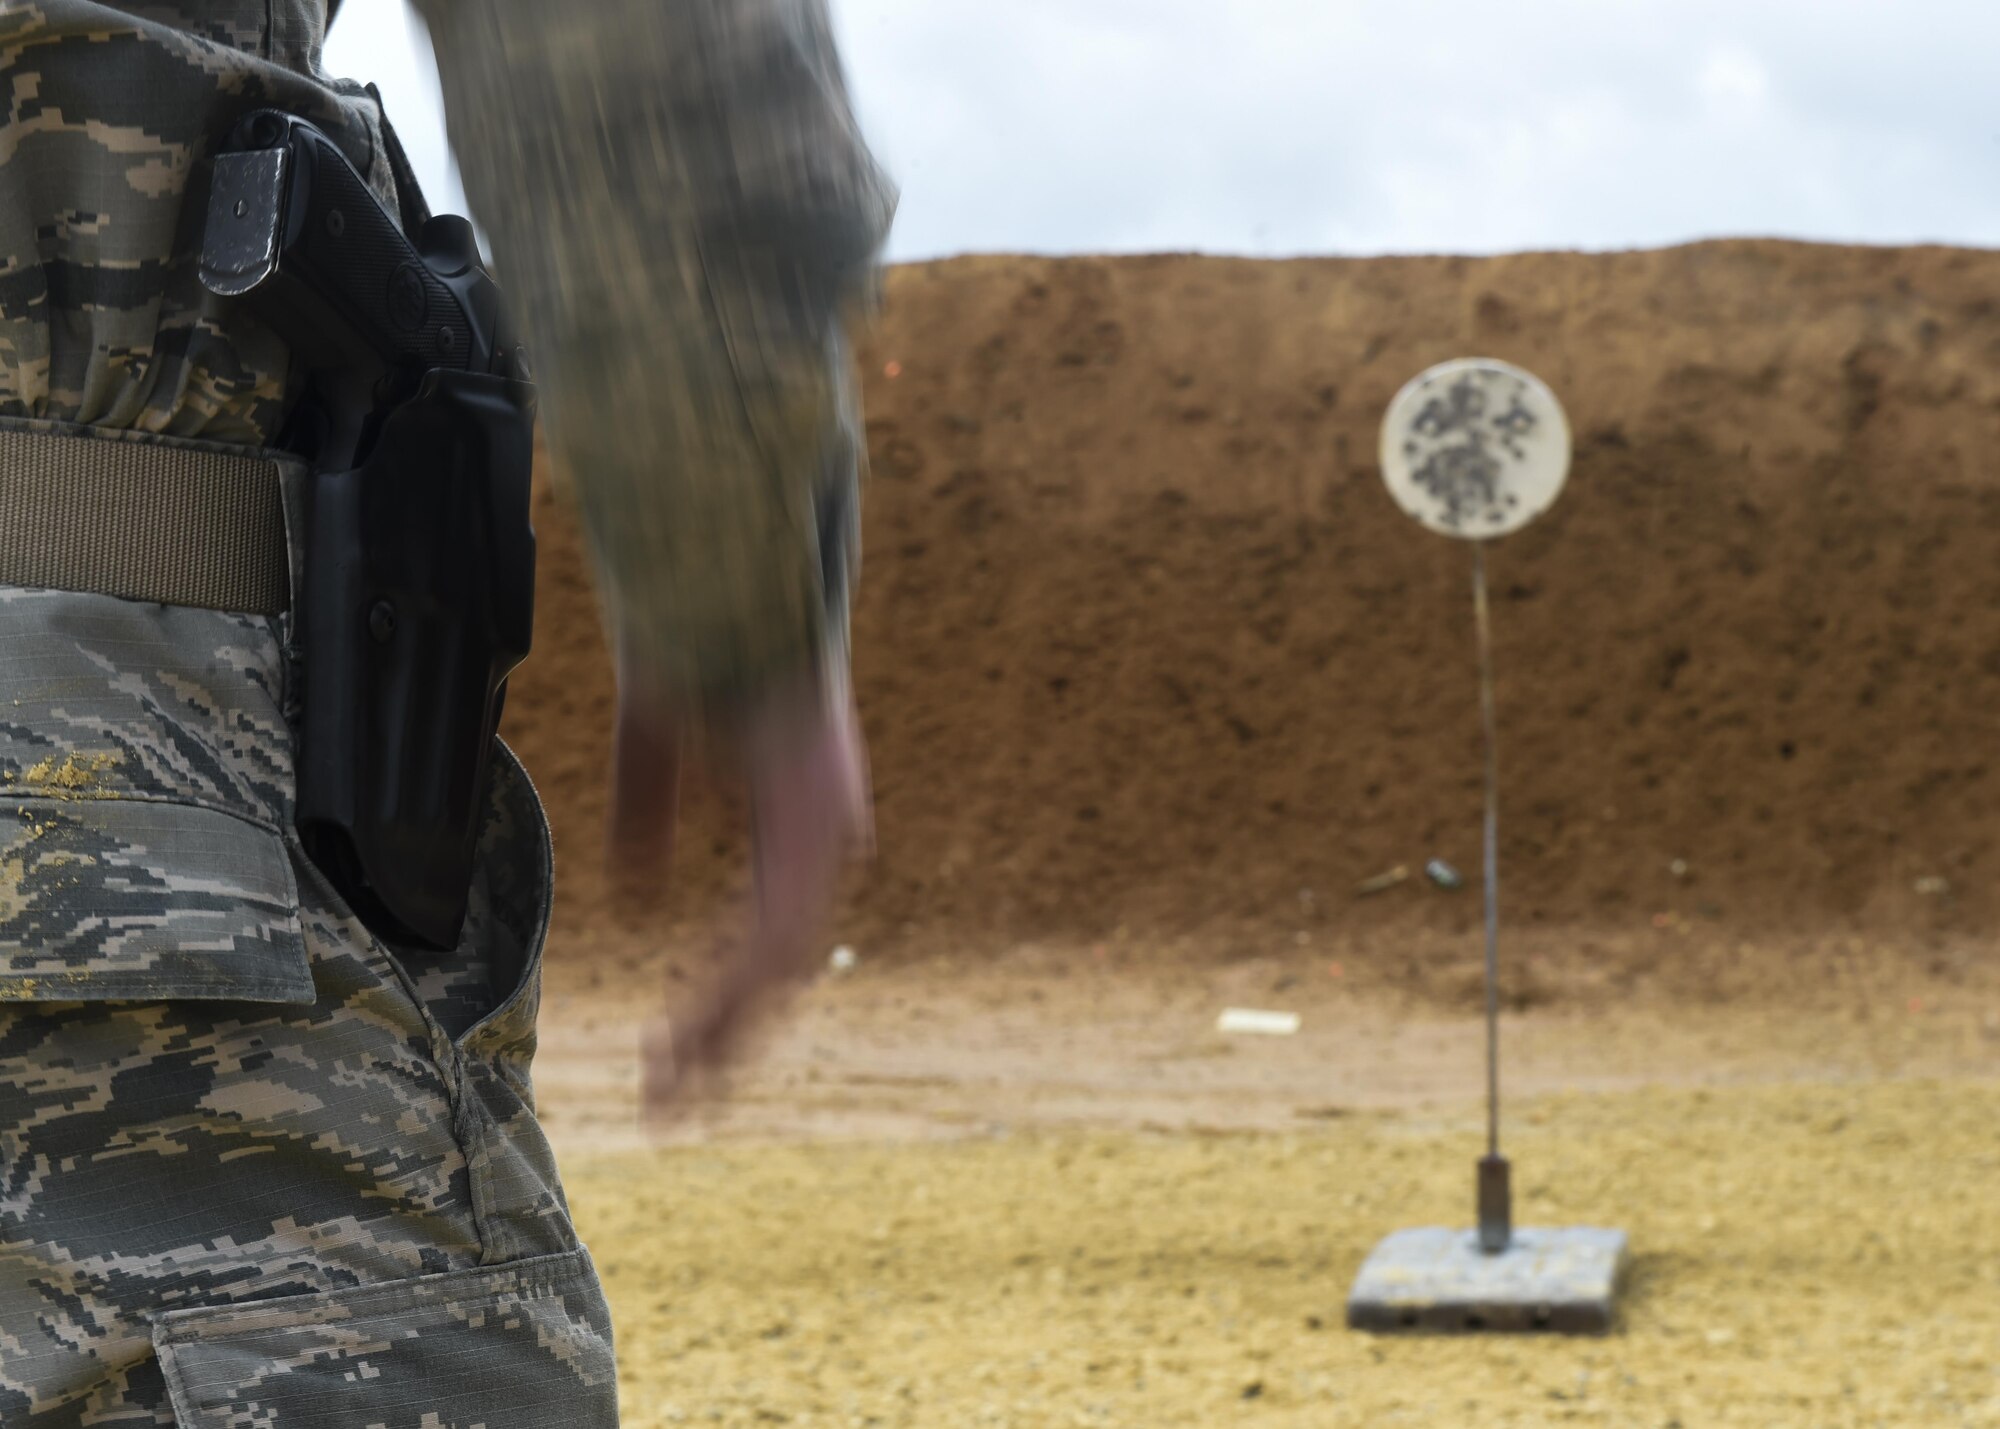 Airman 1st Class Logan Fuchs, a tactical systems operator with the 19th Special Operations Squadron, practices drawing and firing his M9 pistol at a firing range near Baker, Fla., Feb. 23, 2016. Students attempted to draw and fire five shots at a target in less than three-and- a-half seconds, the approximate time it takes someone to get close enough to attack with an edged weapon. In the first stage of training, Airmen learn the basics of firearms manipulation and employment before continuing to more advanced training. (U.S. Air Force photo by Airman 1st Class Kai White)